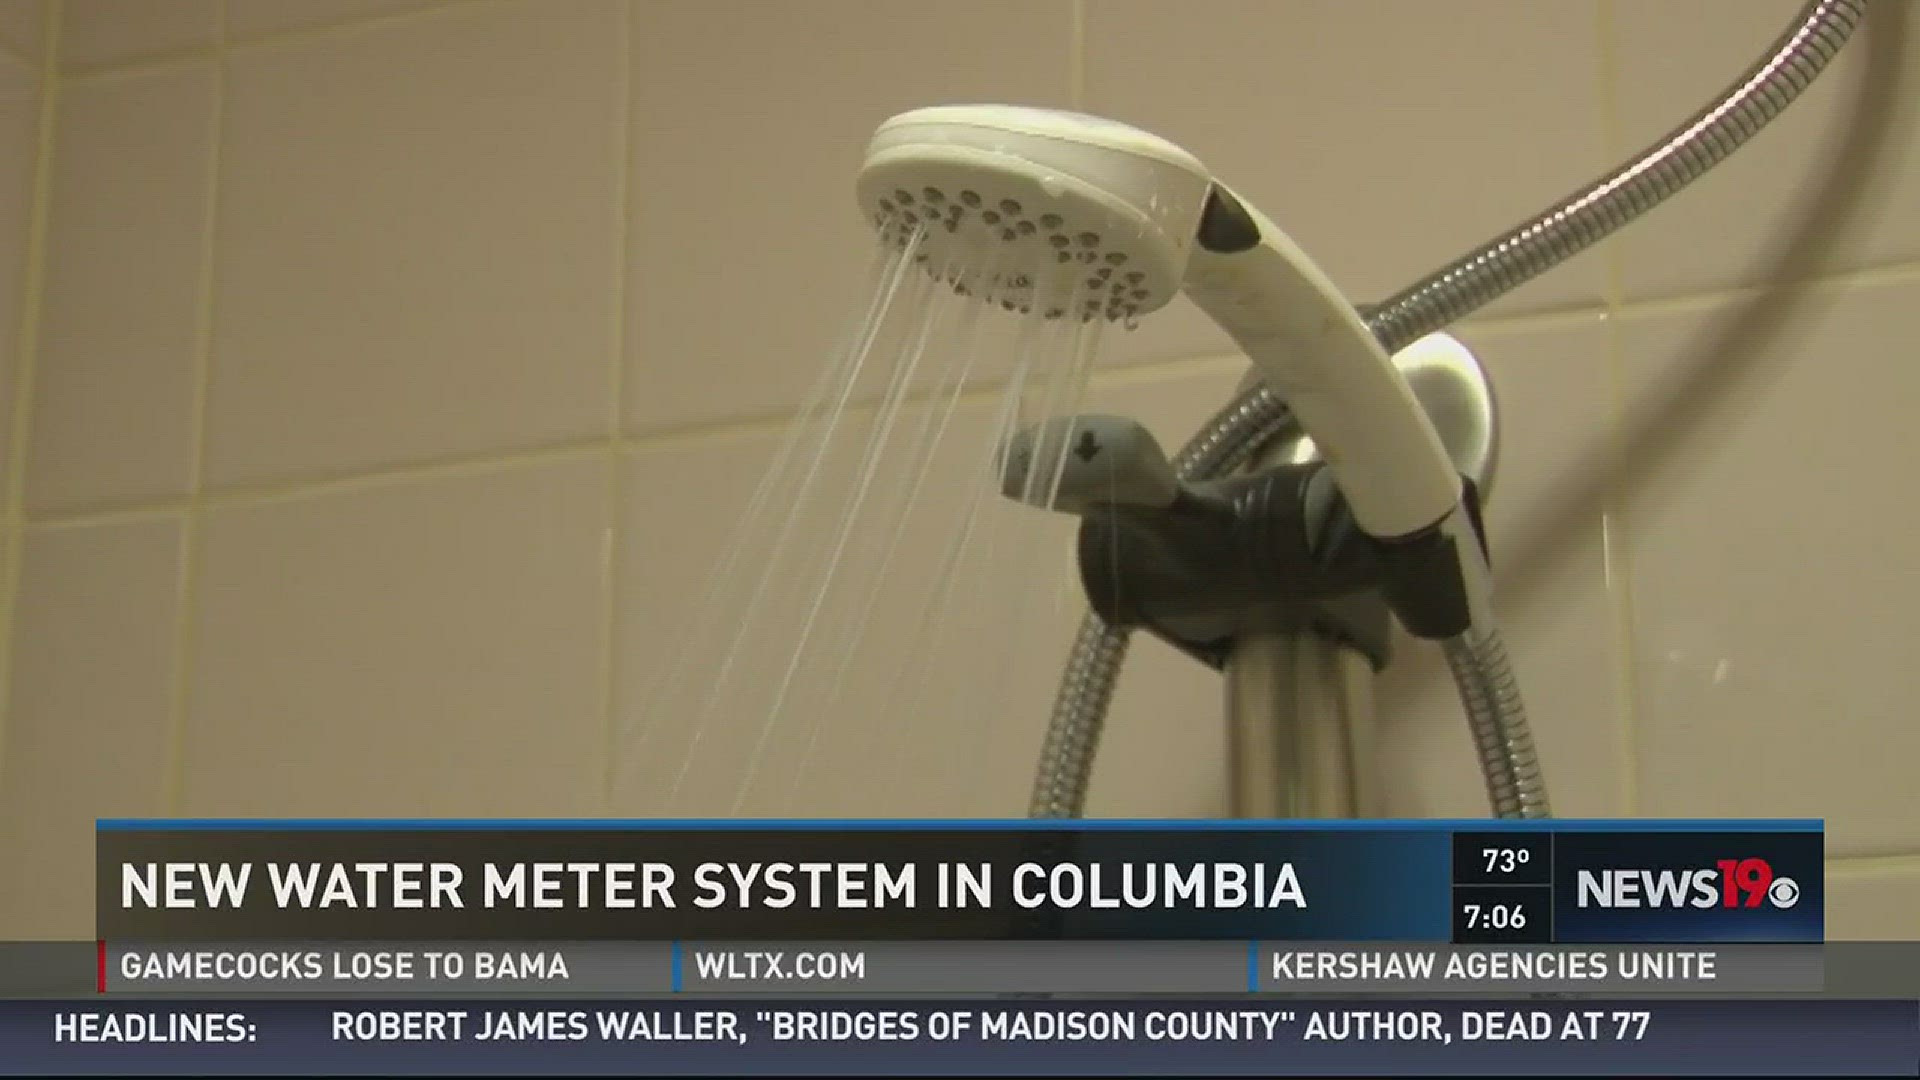 A new water meter system is being installed in Columbia,